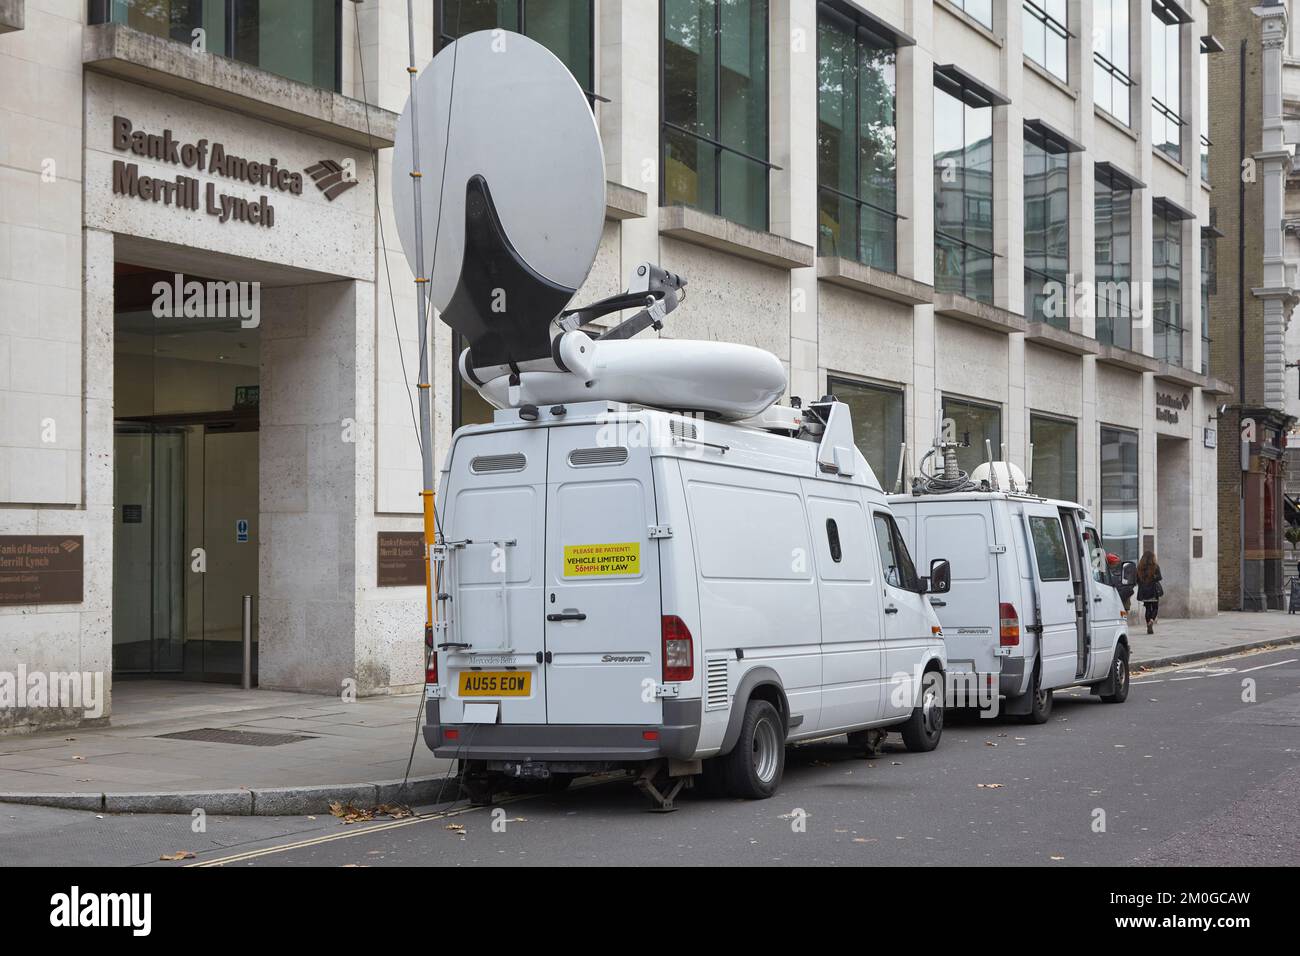 TV broadcast van with satellite dish outside the Bank of America Merrill Lynch branch in London, UK Stock Photo